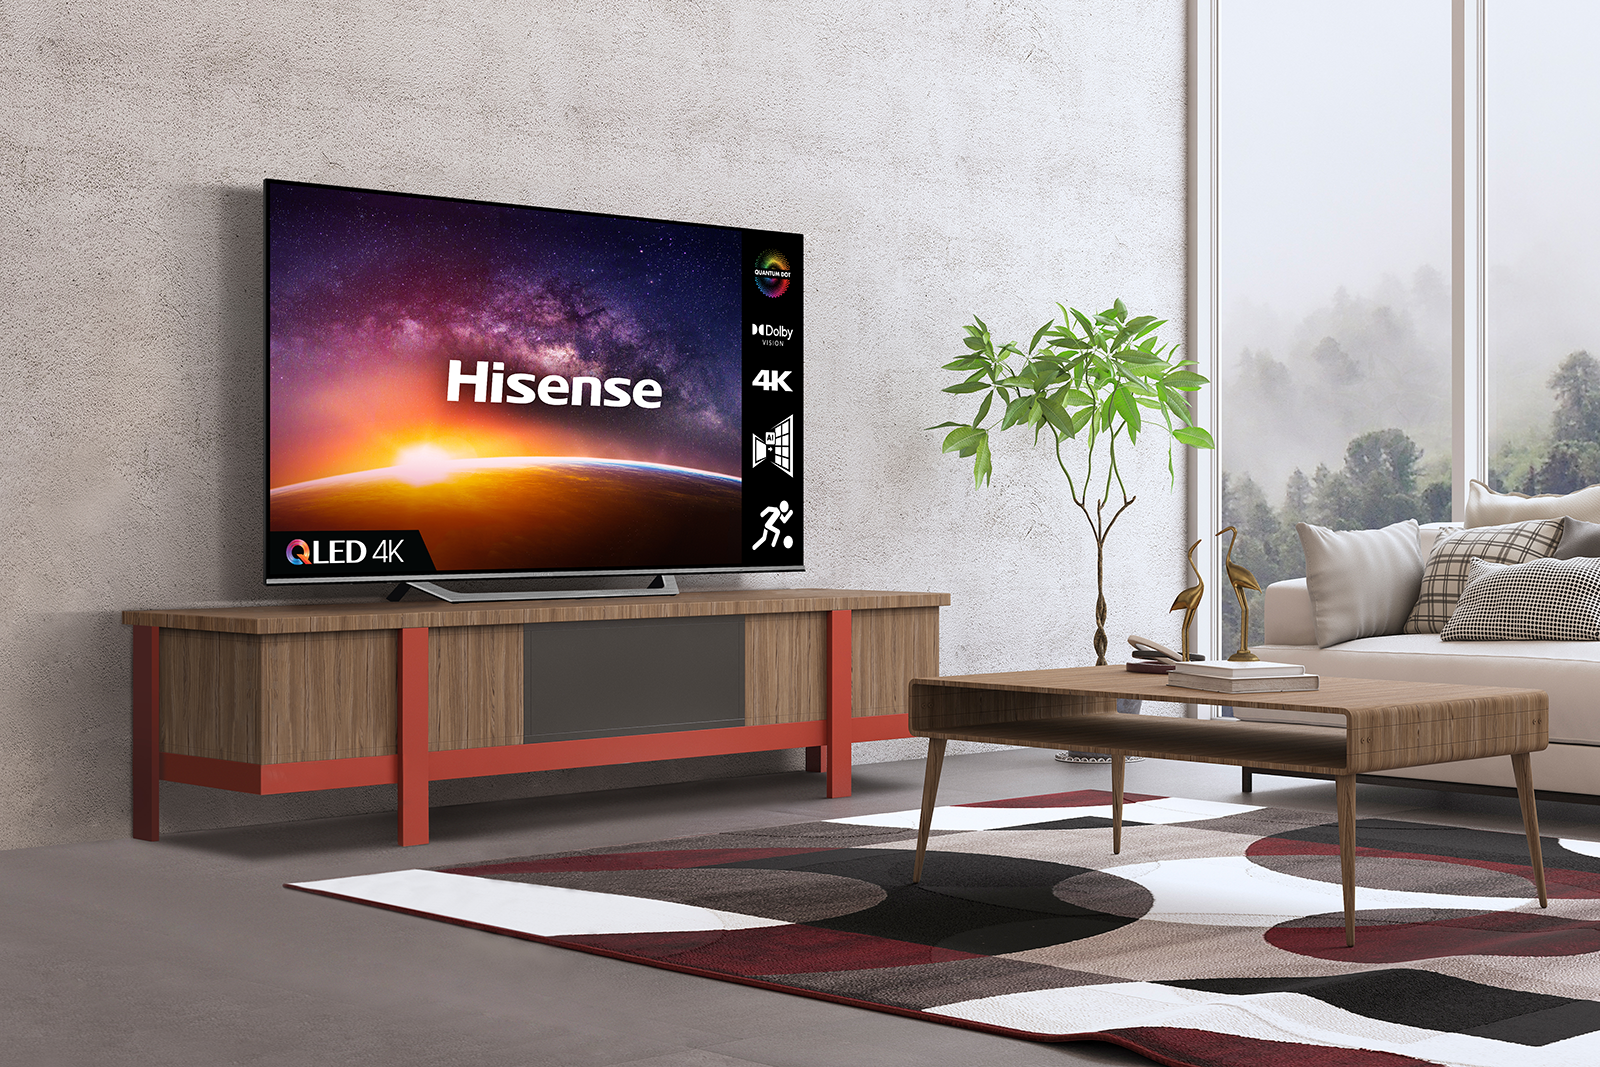 Hisense's early Black Friday deals include 4K HDR TVs under £300 photo 2